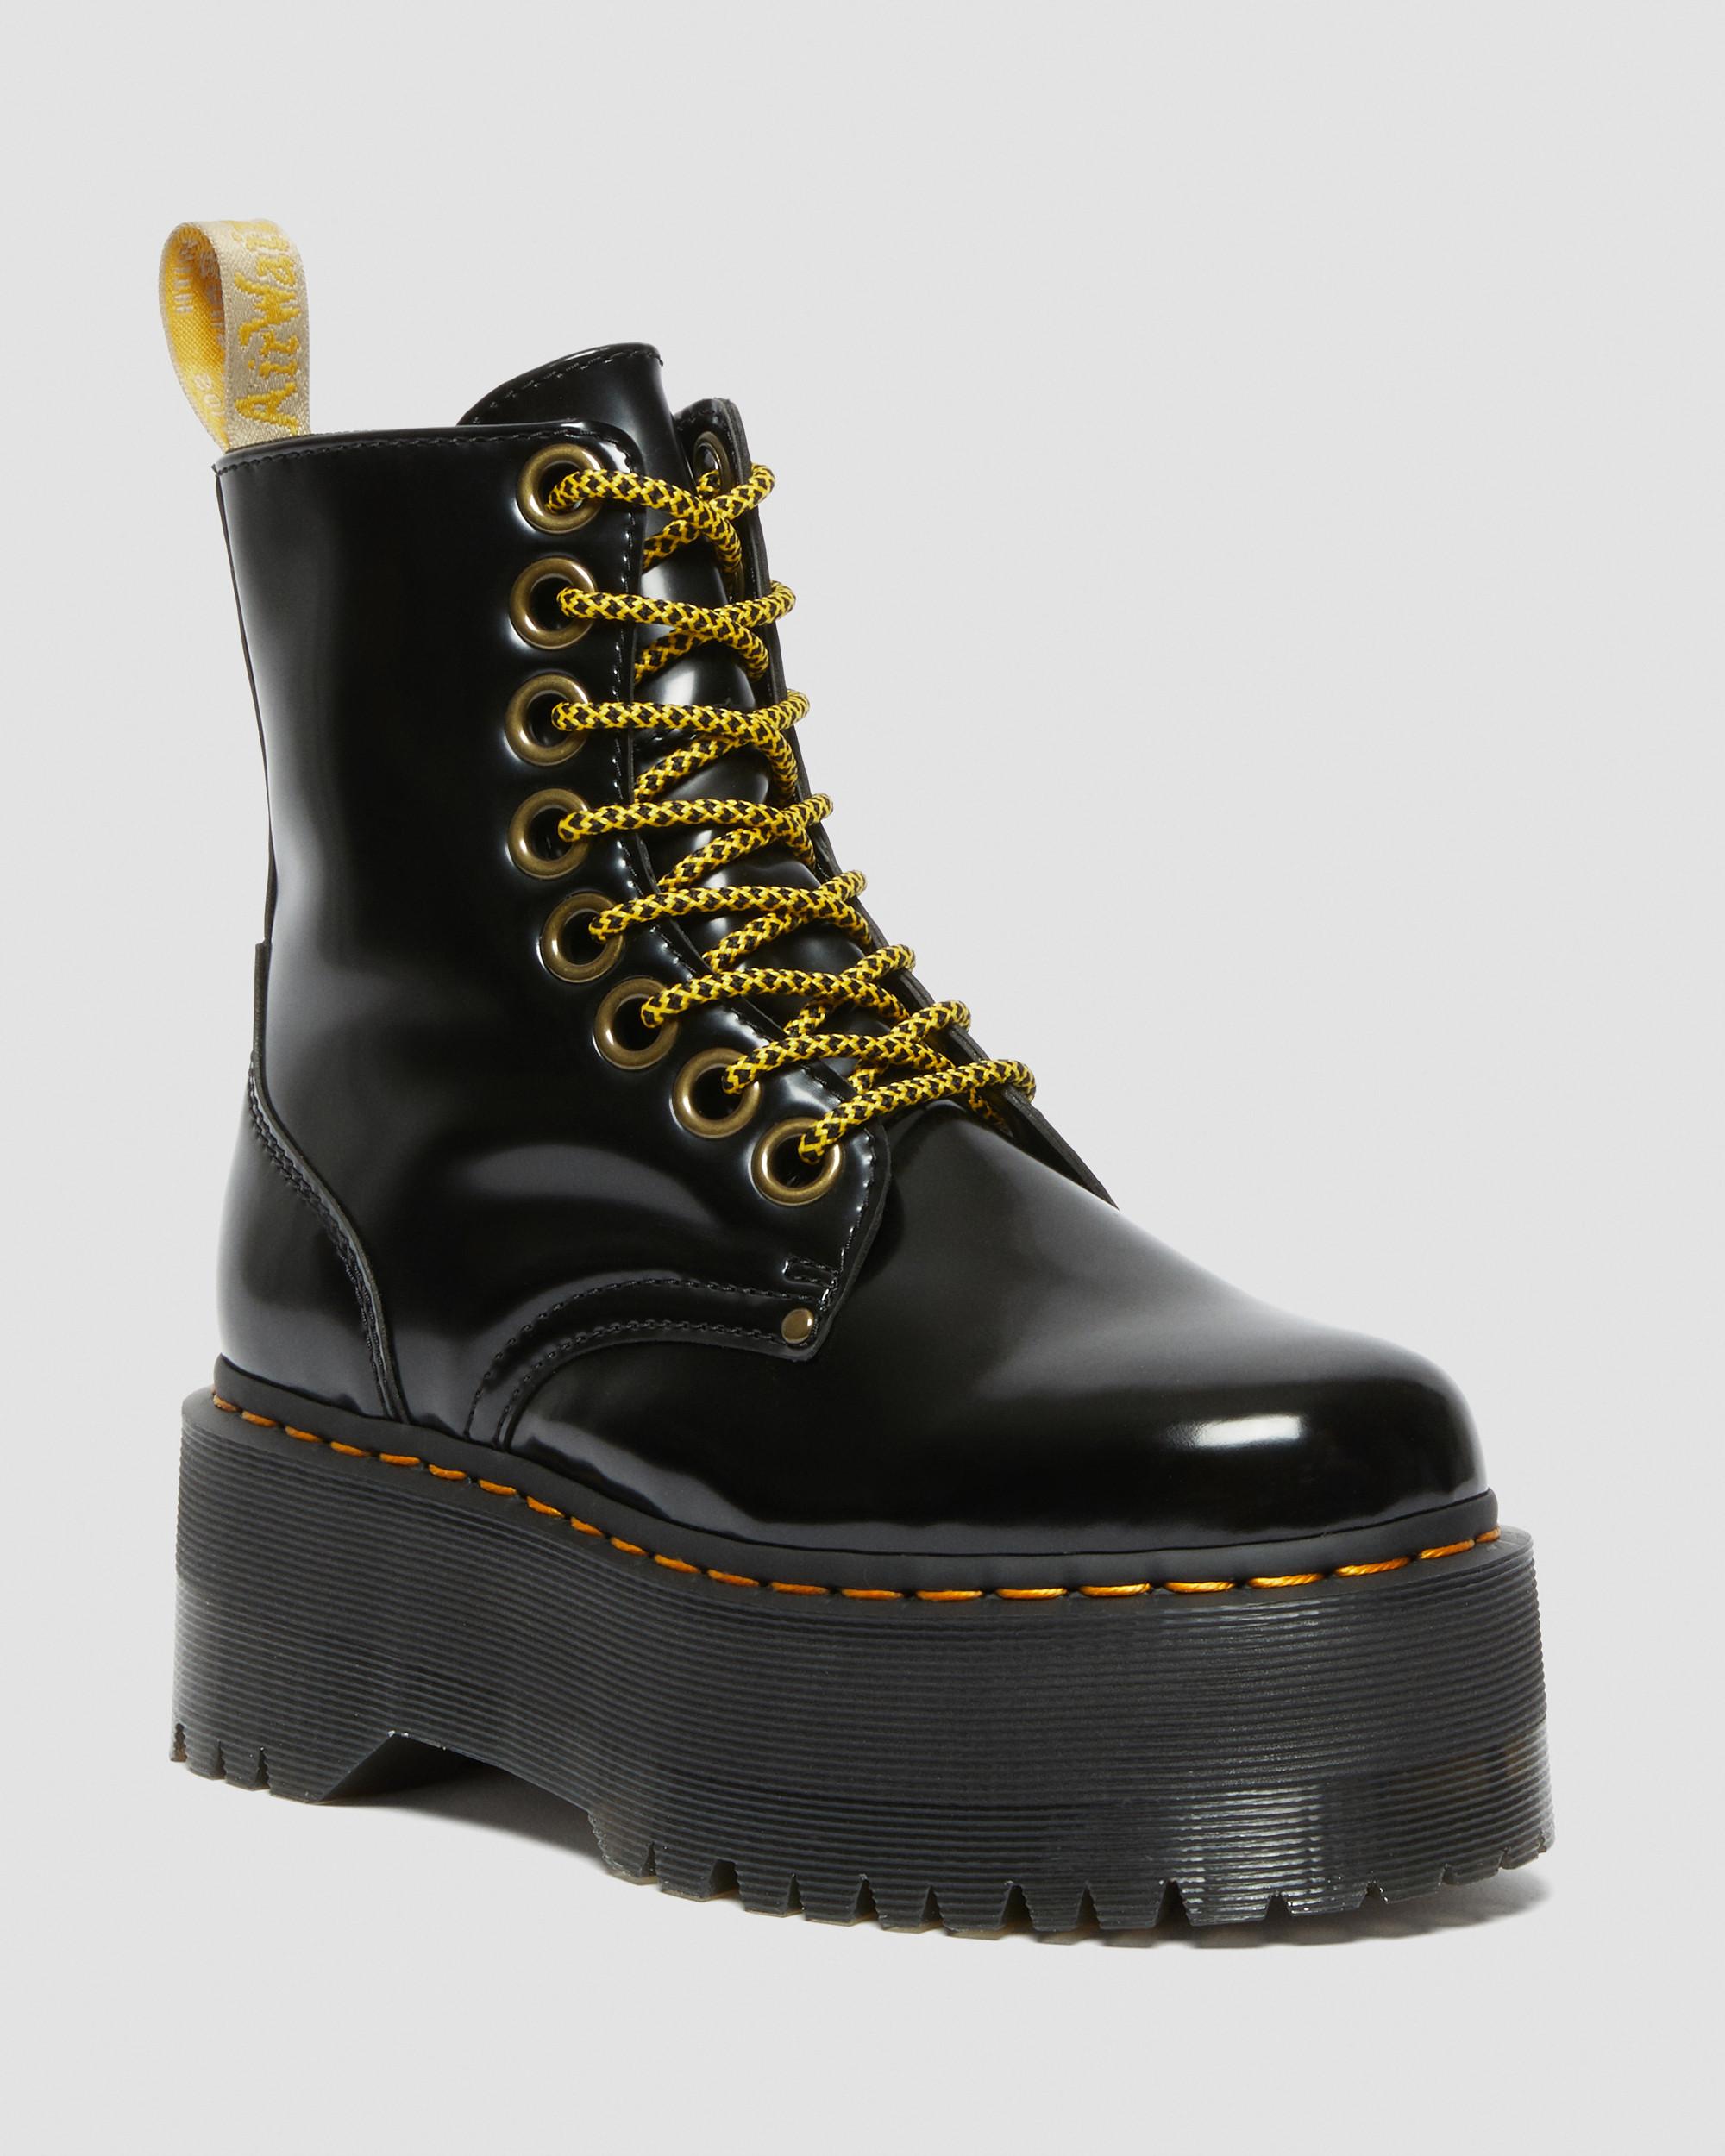 How to Style Platform Docs: 6+ Outfit Ideas | Dr. Martens